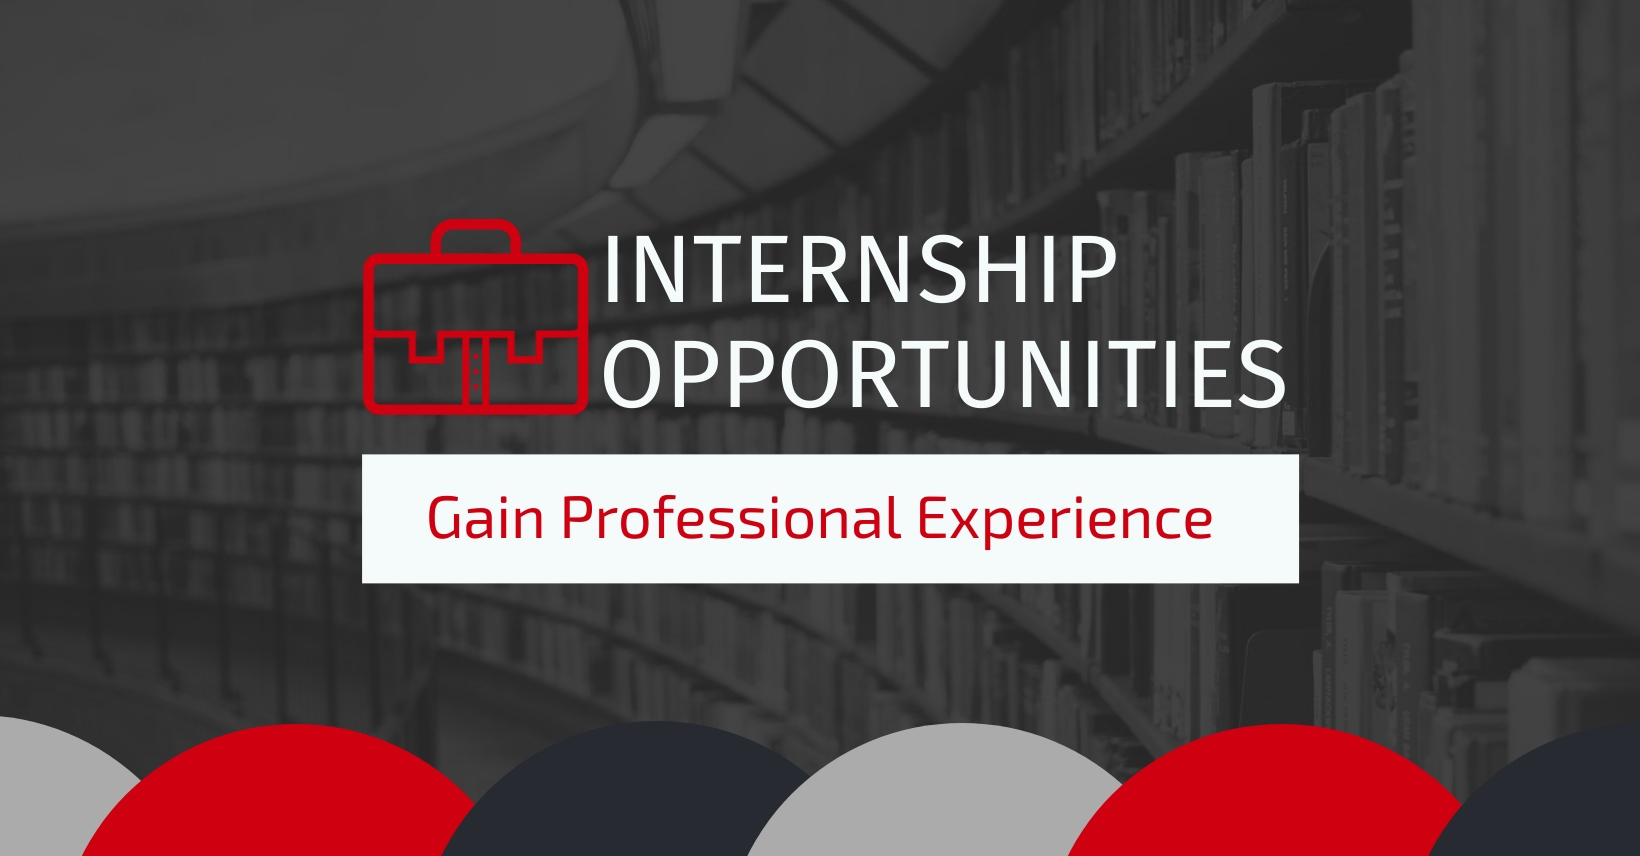 Internship Opportunities: Gain Professional Experience